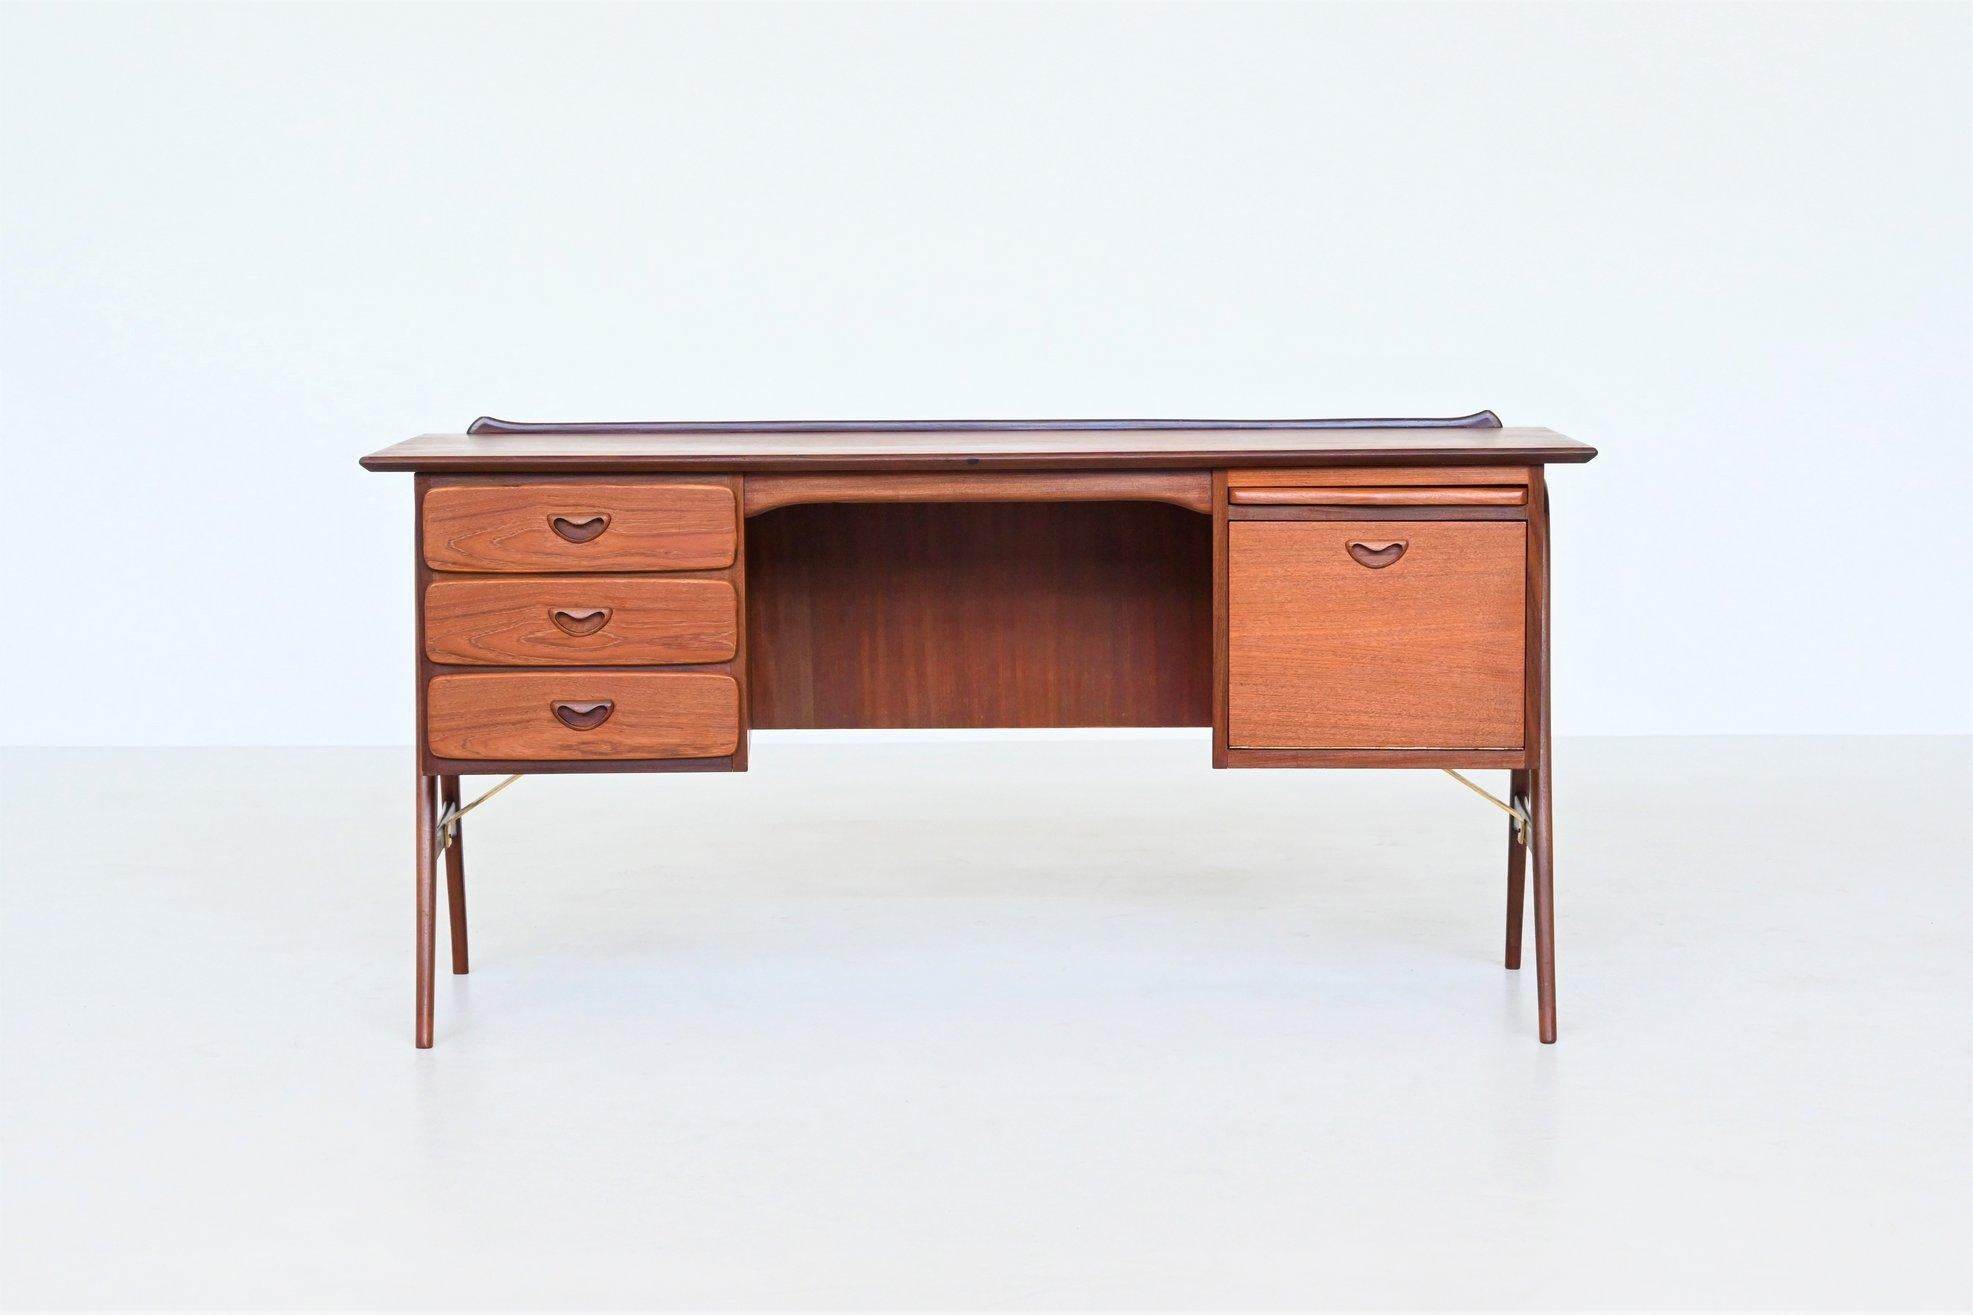 Beautiful boomerang shaped writing desk designed by Louis van Teeffelen and manufactured by Webe Meubelen, The Netherlands 1960. The desk is made of veneered teak wood and is supported by a solid teak wooden frame with brass details. This high